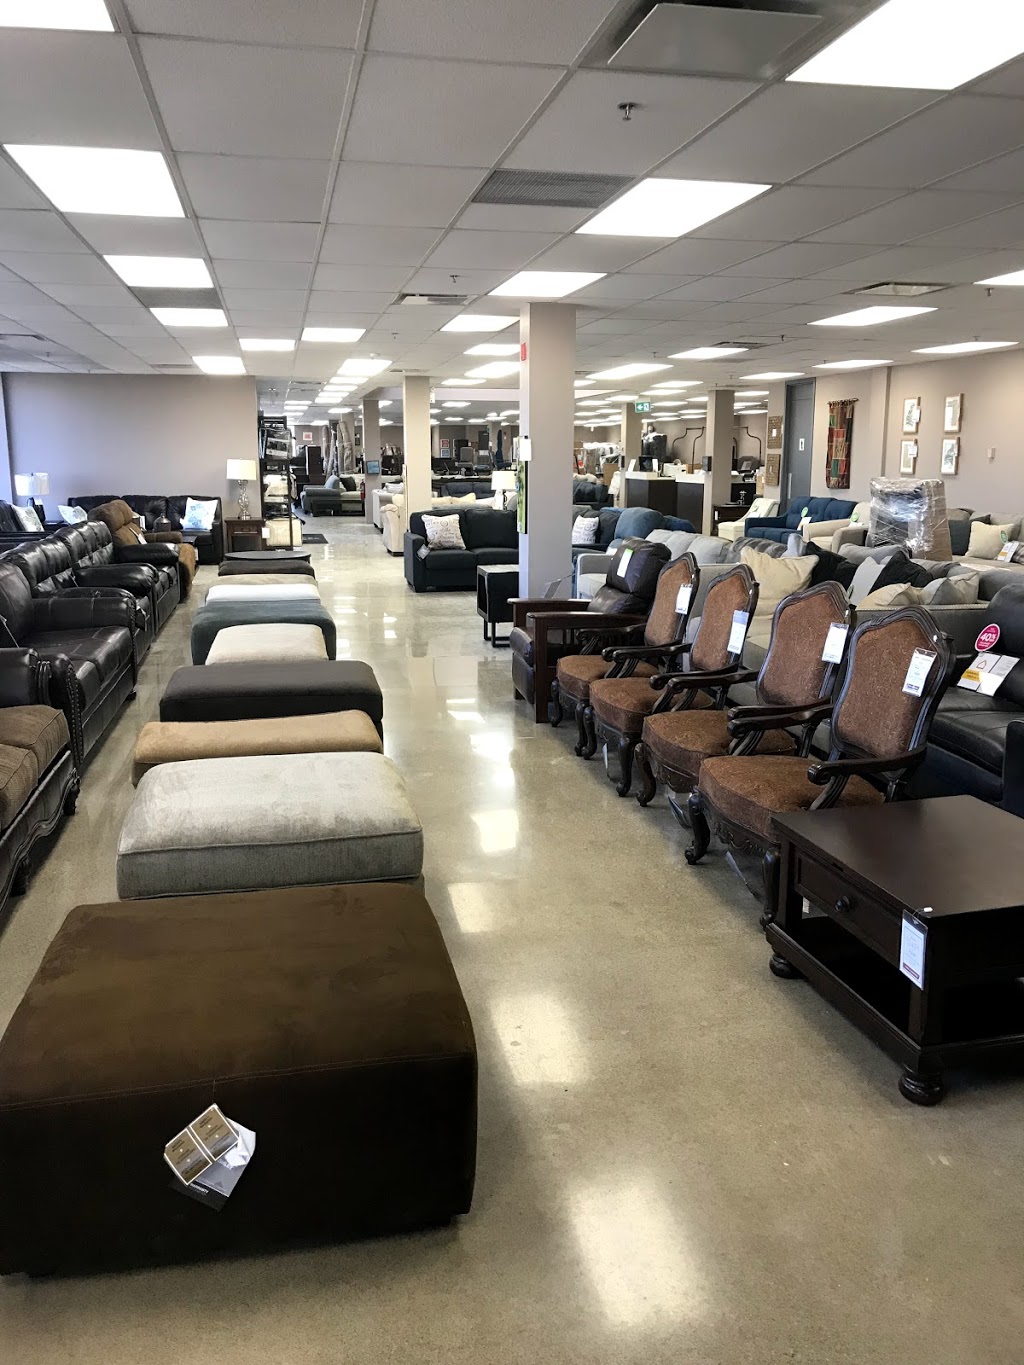 Ashley Homestore Clearance Outlet 333 Matheson Blvd W